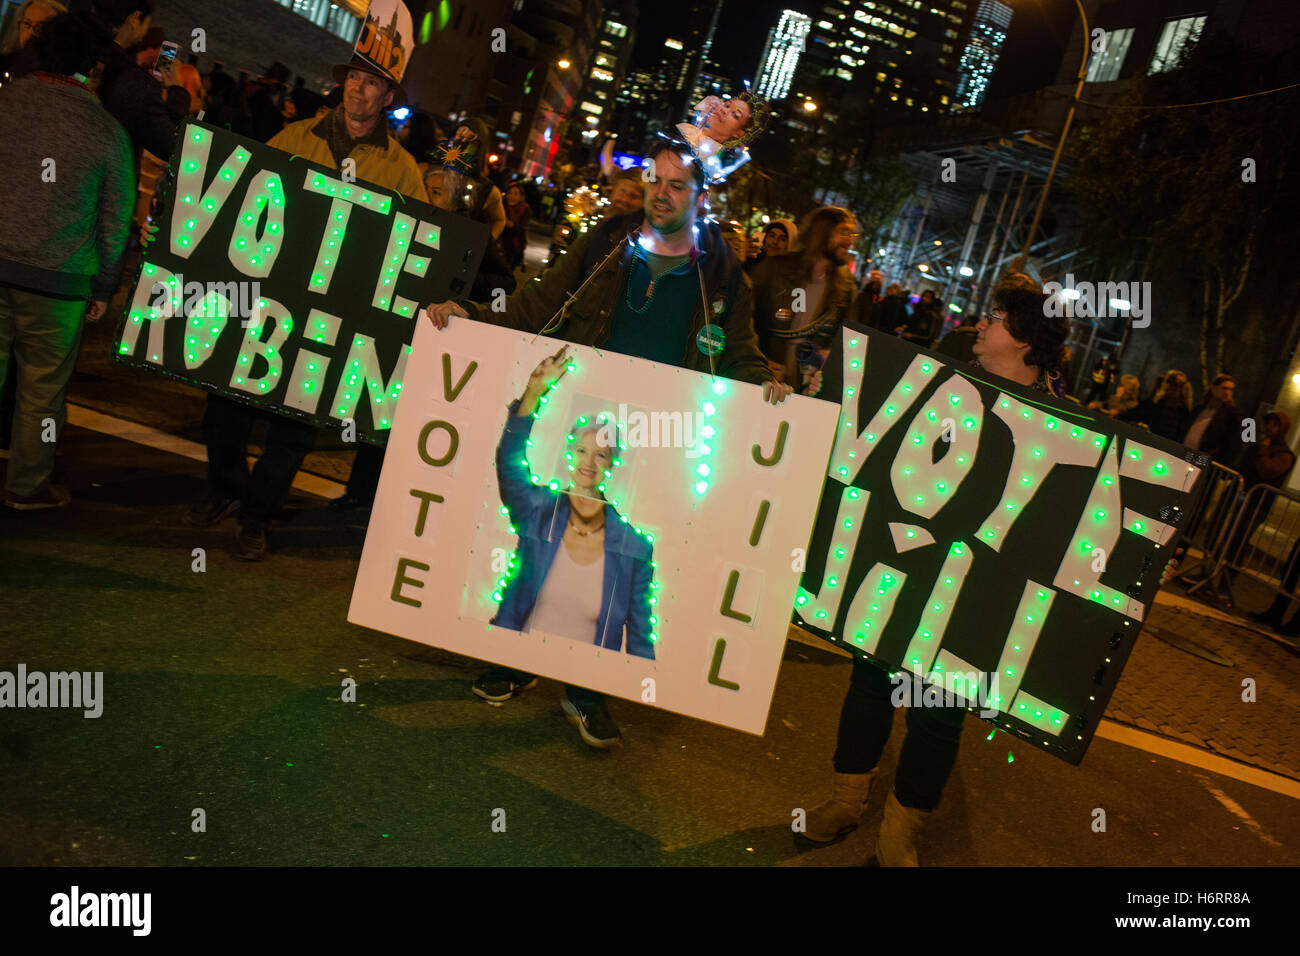 New York, NY - 31 October 2016. Marchers in the annual Greenwich Vilage Halloween Parade carry signs in support of Green Party pesidential candidate Jill Stein. Credit:  Ed Lefkowicz/Alamy Live News Stock Photo